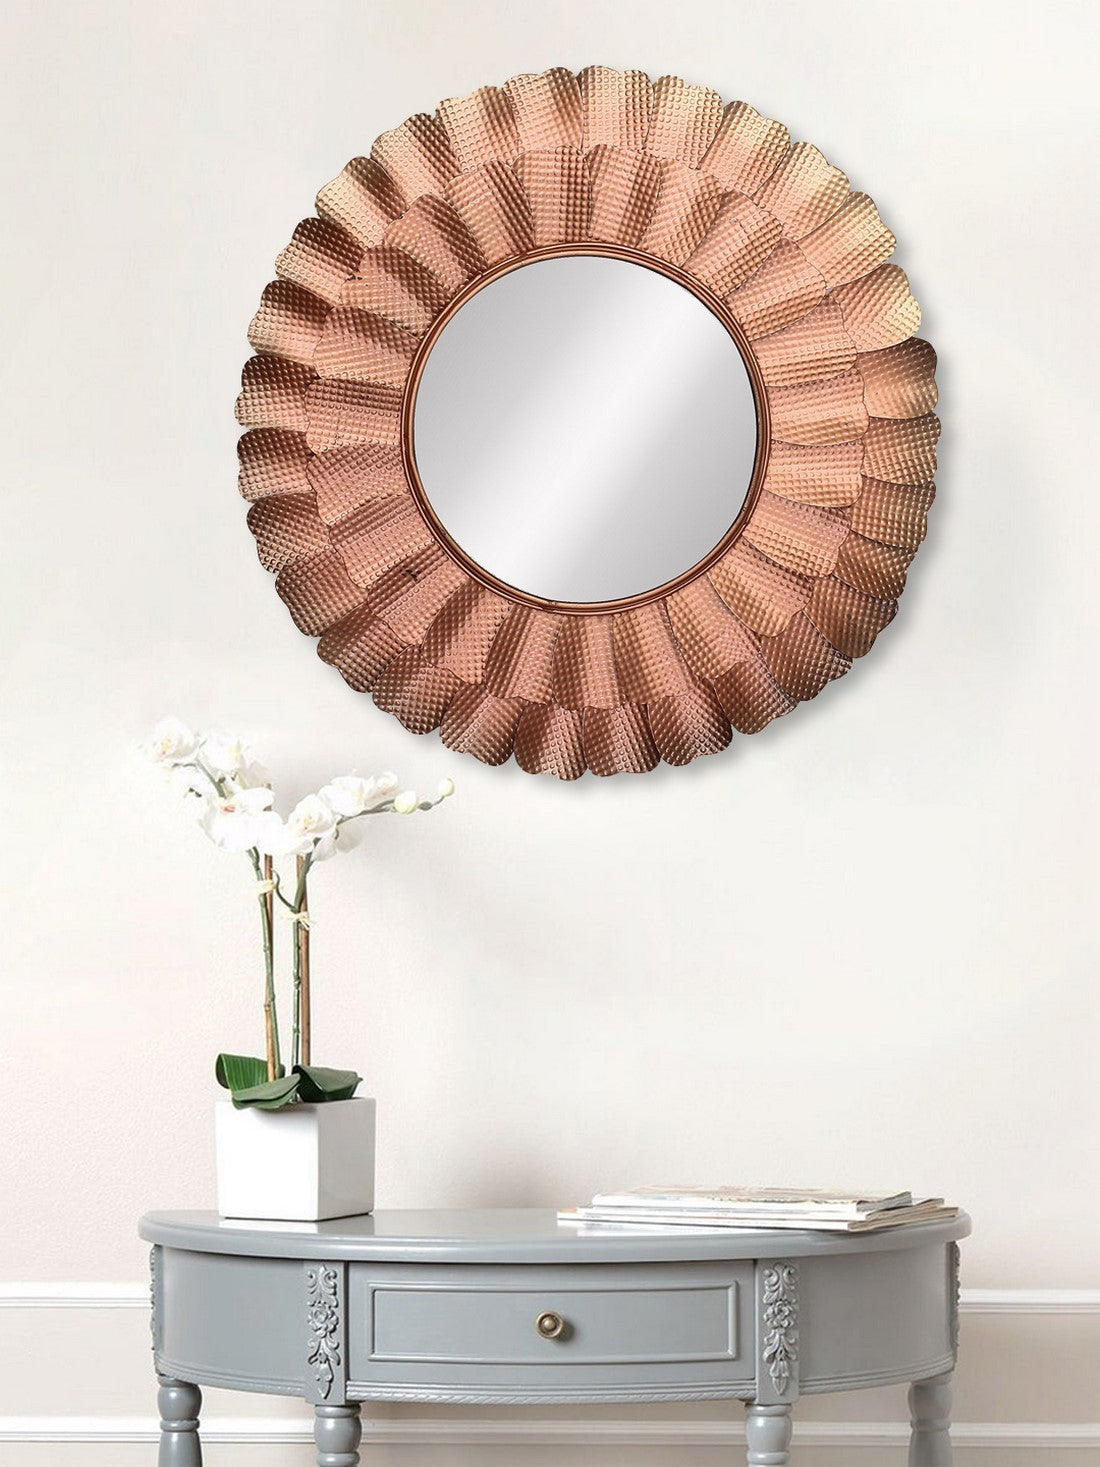 Copper Decorative Metal Handcarved Wall Mirror